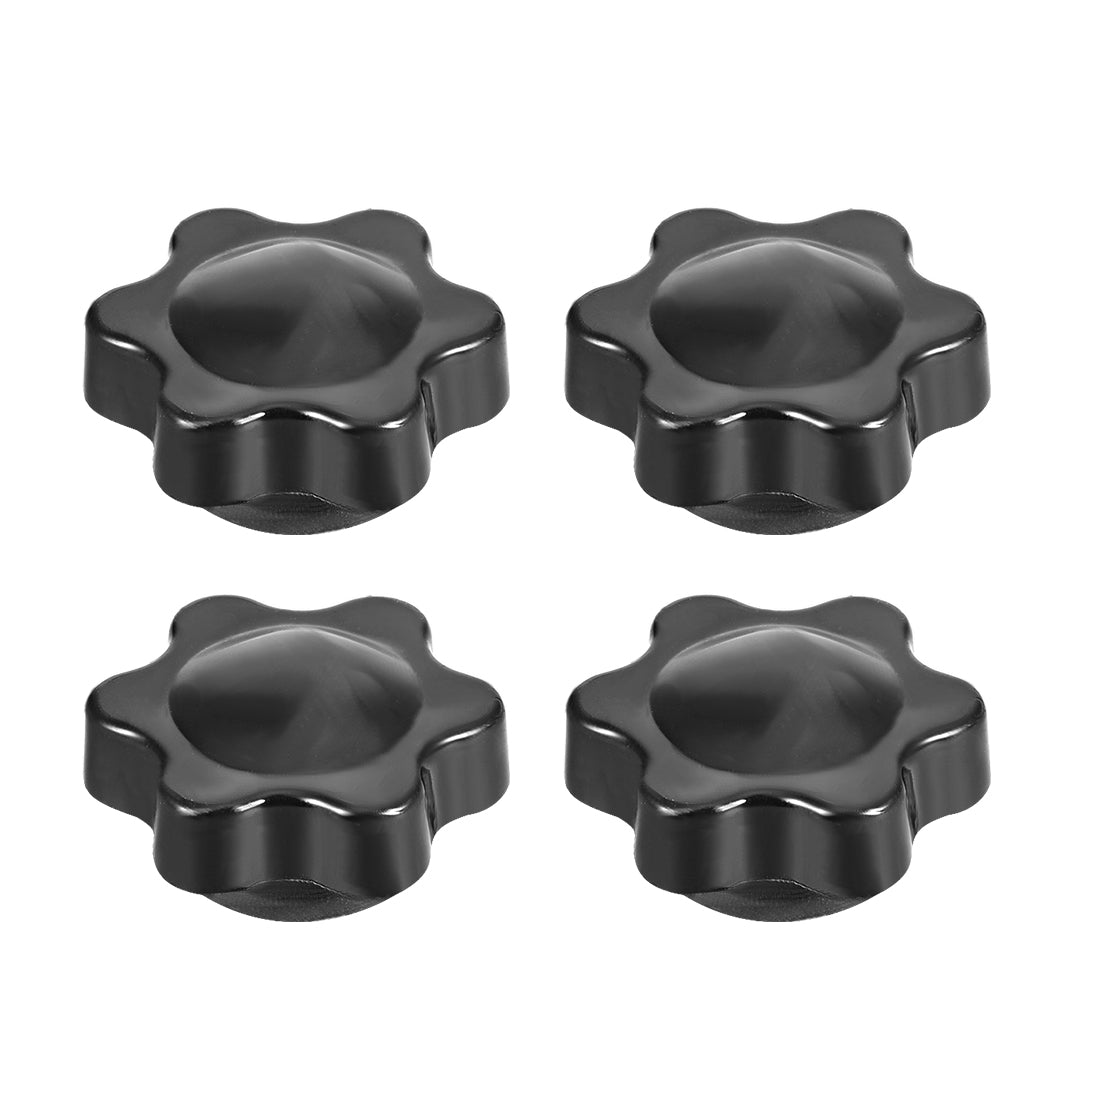 uxcell Uxcell Clamping Handle Gripandles Screw Knobs Handgrips Star Knob Female Thread 4pcs